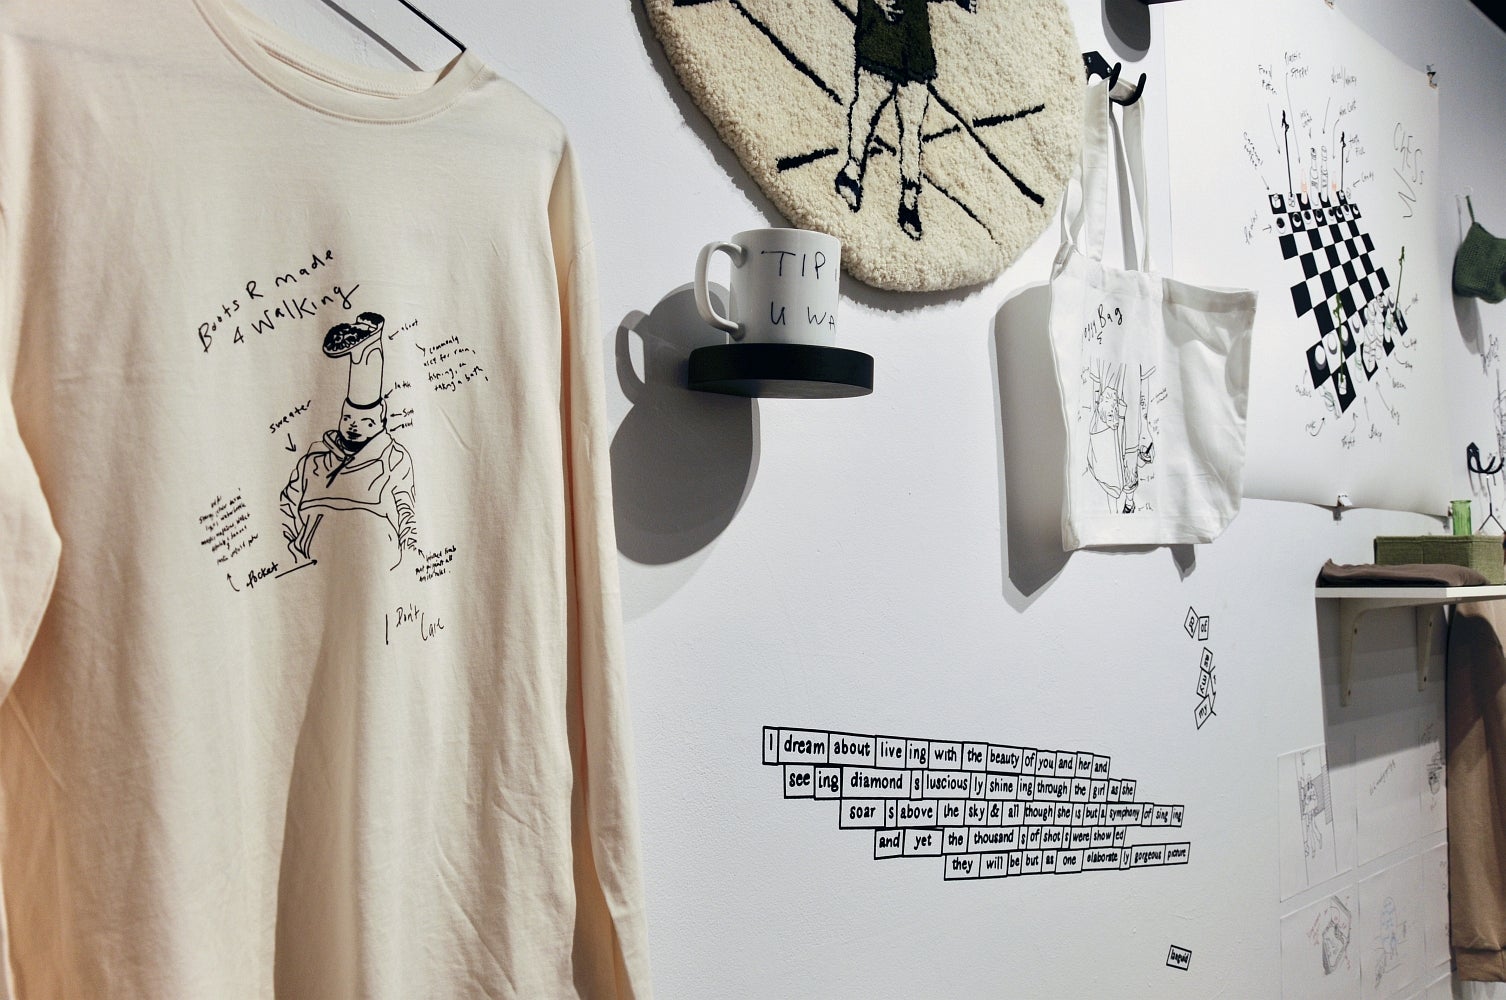 Detail of a gallery filled with various objects including sweatshirt, mug, knotted rug, pages of drawing and vinyl text.